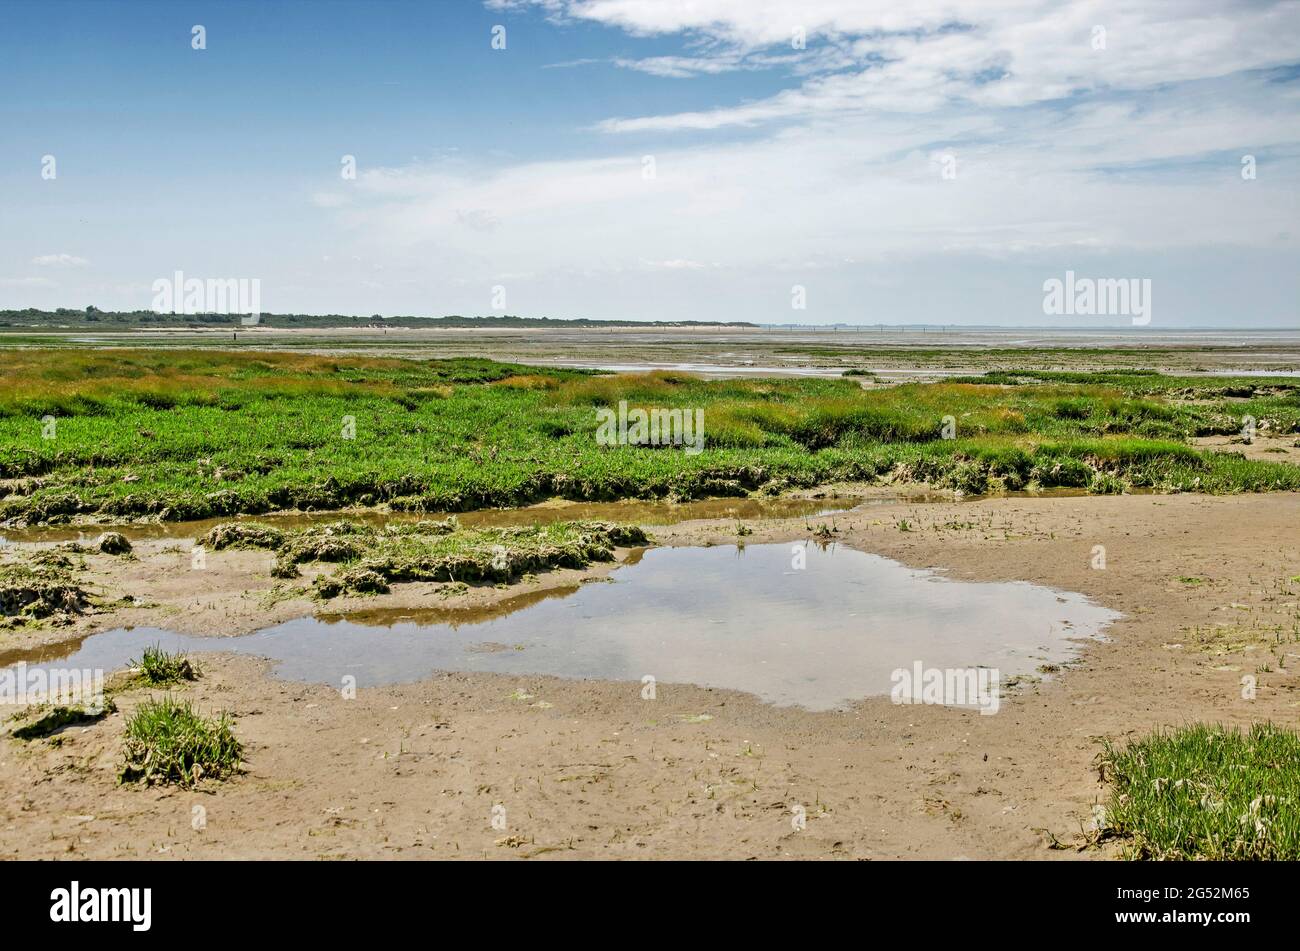 Shallow puddles, muddy beach and low vegetation at the Natura2000 area near Oostvoorne, The Netherlands Stock Photo